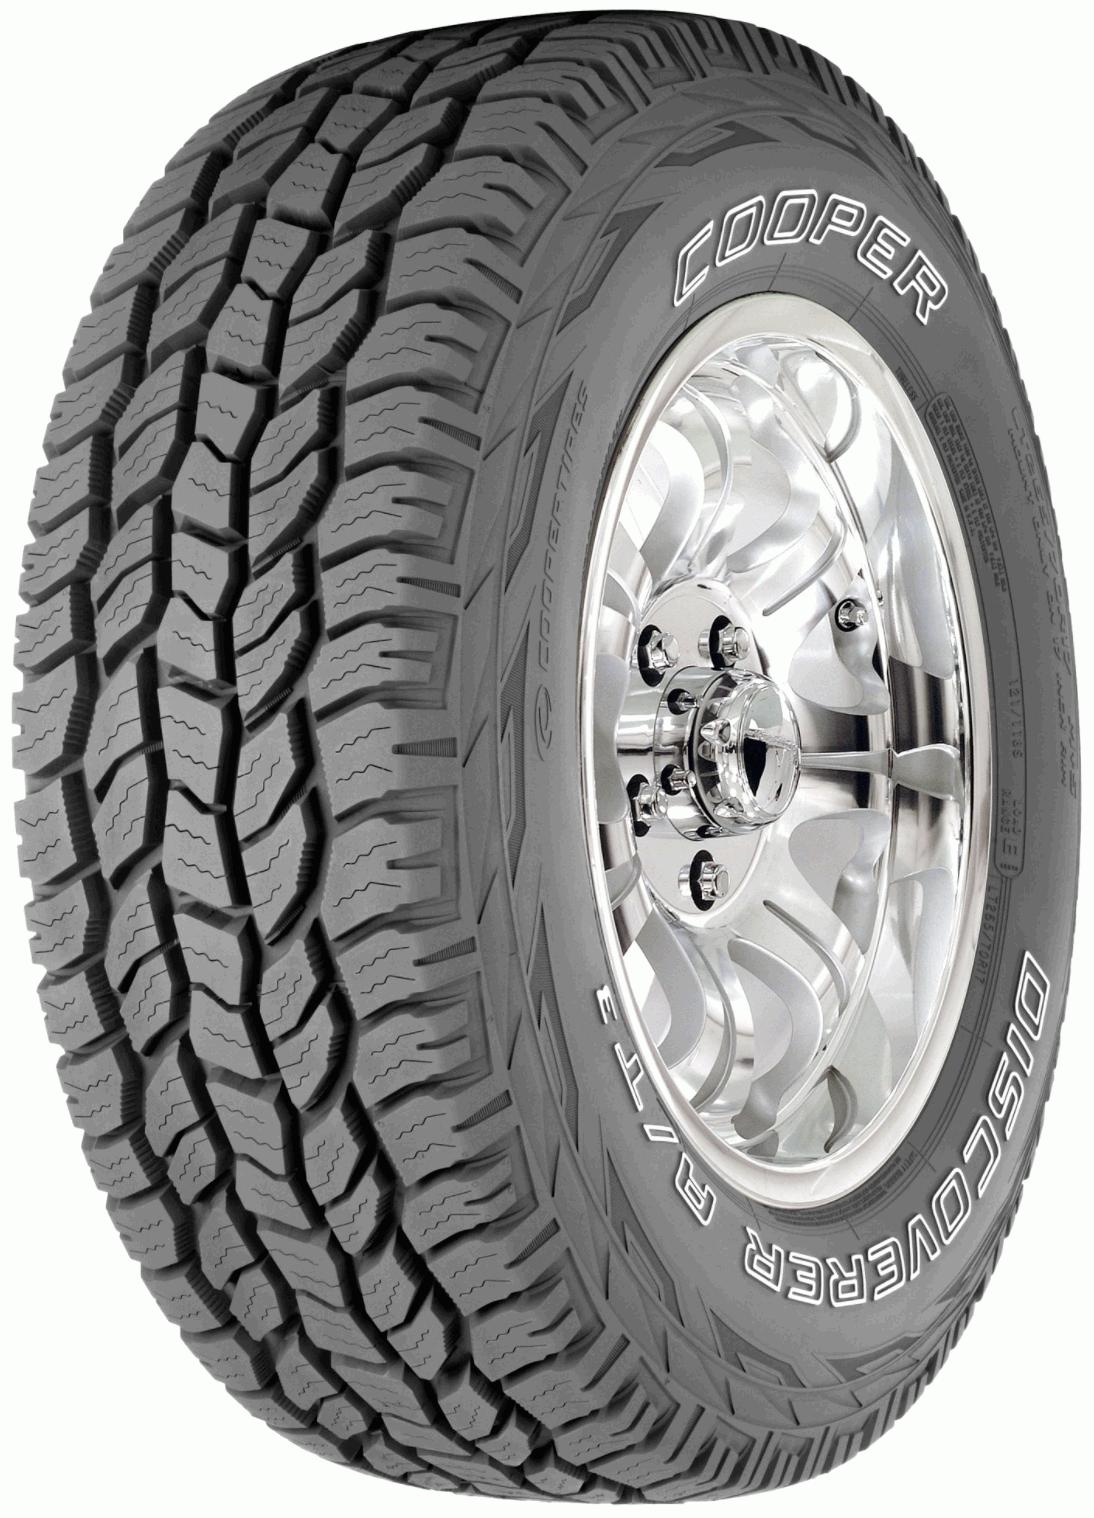 Cooper Discoverer AT3 - Tyre Reviews and Tests